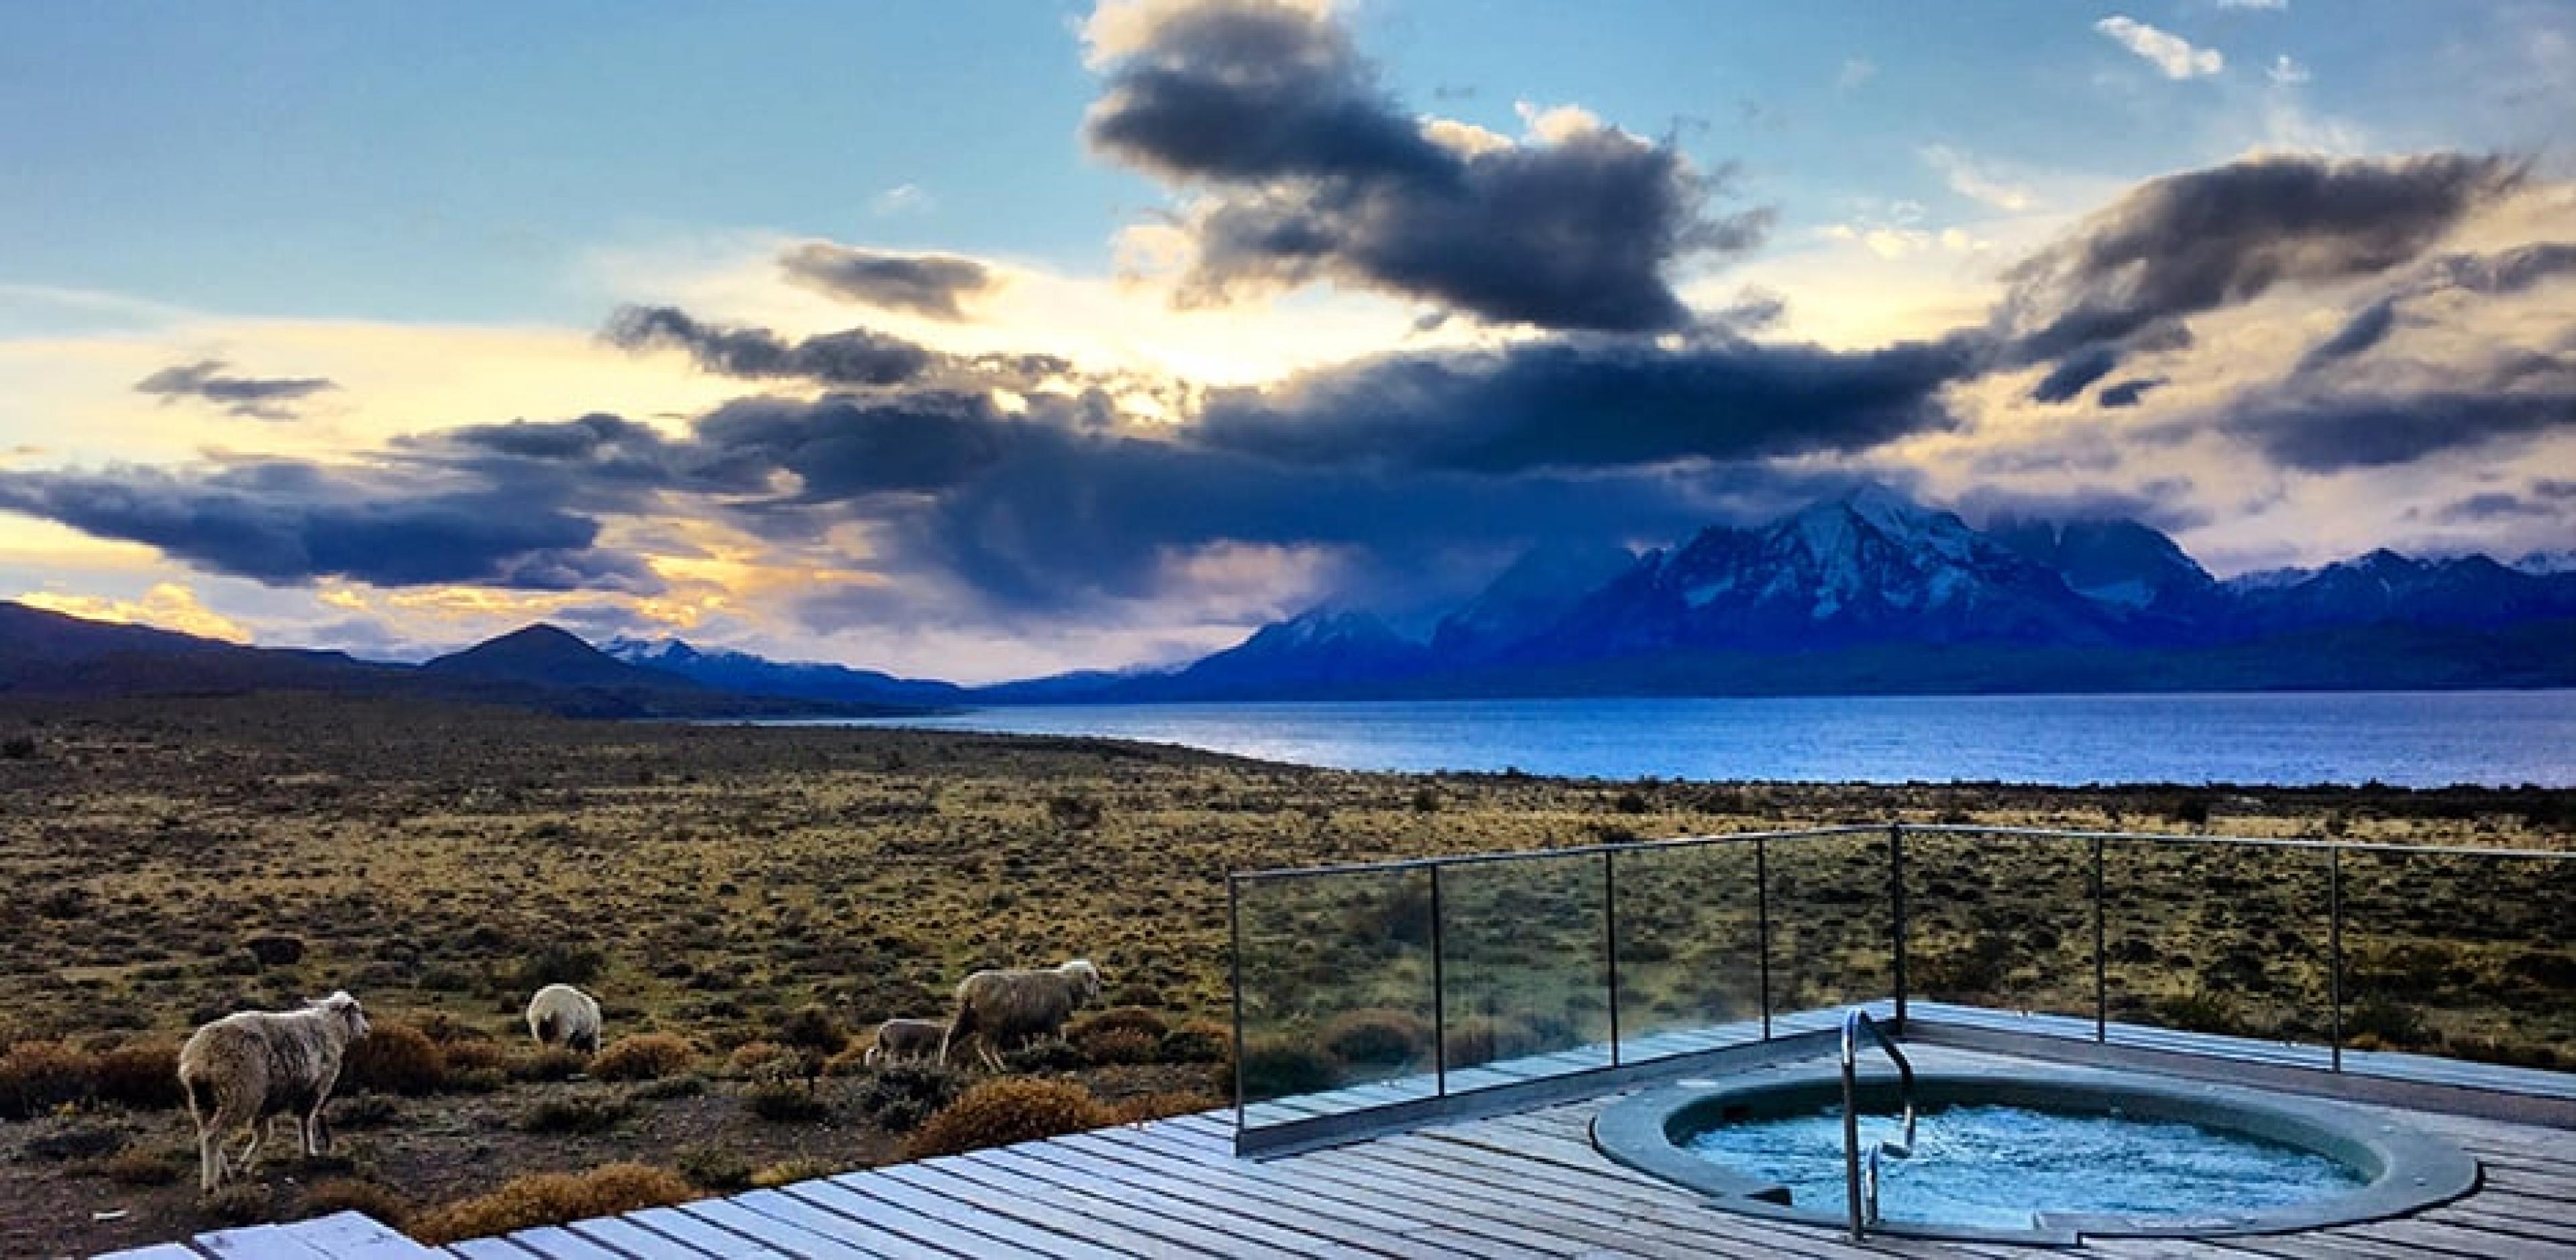 Sheep grazing next to Tierra Patagonia's outdoor hot tub,Chilean Patagonia